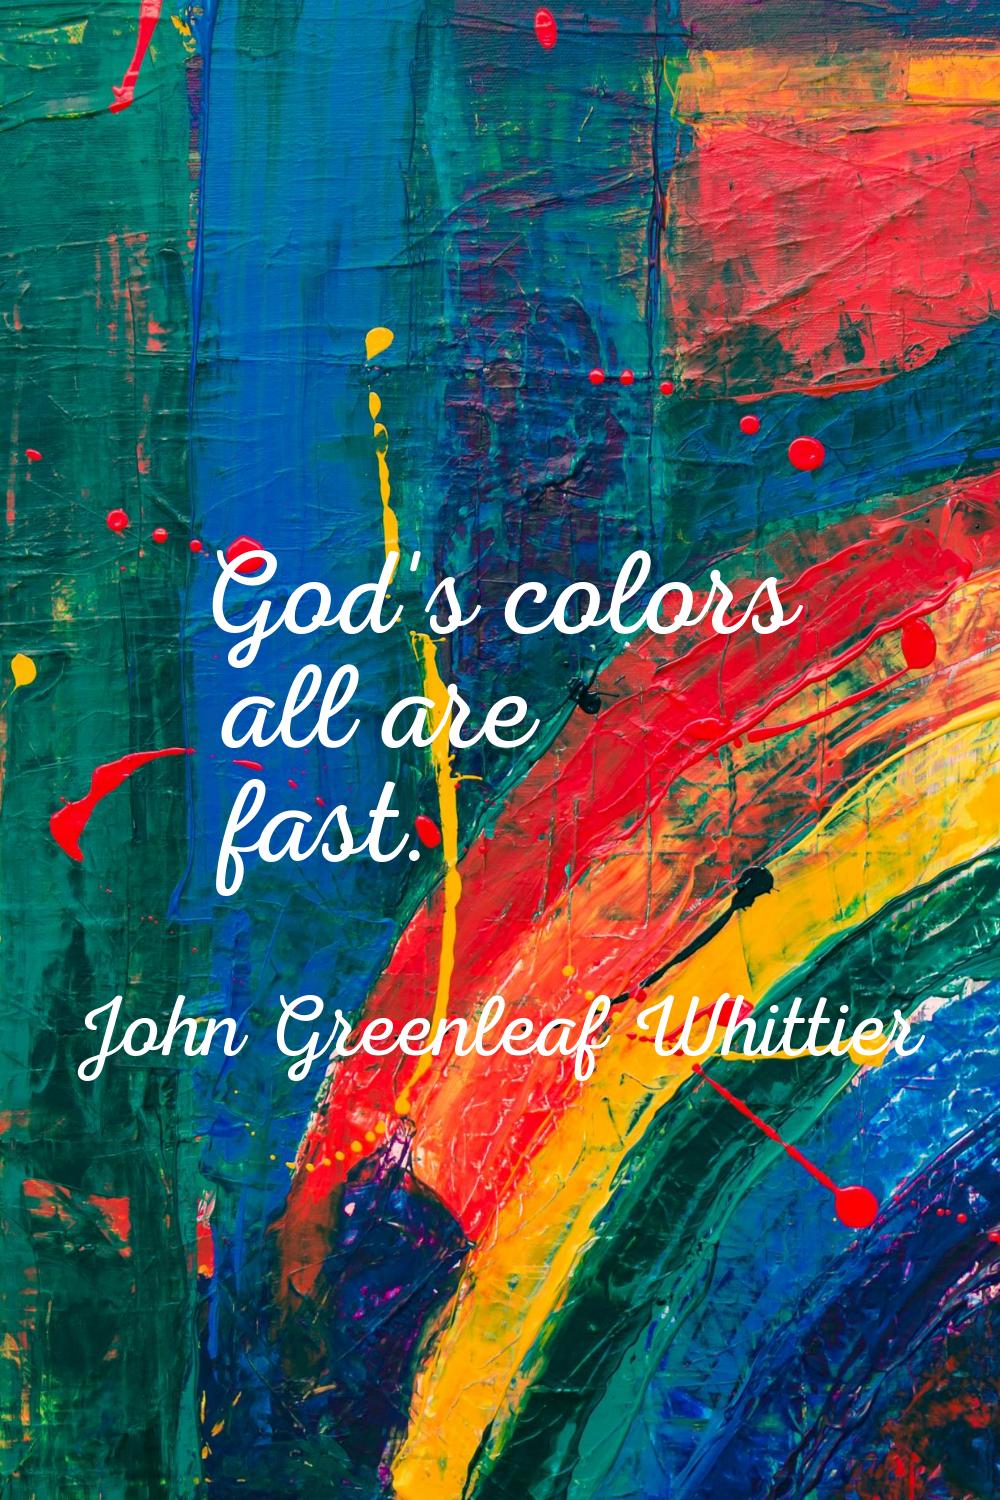 God's colors all are fast.